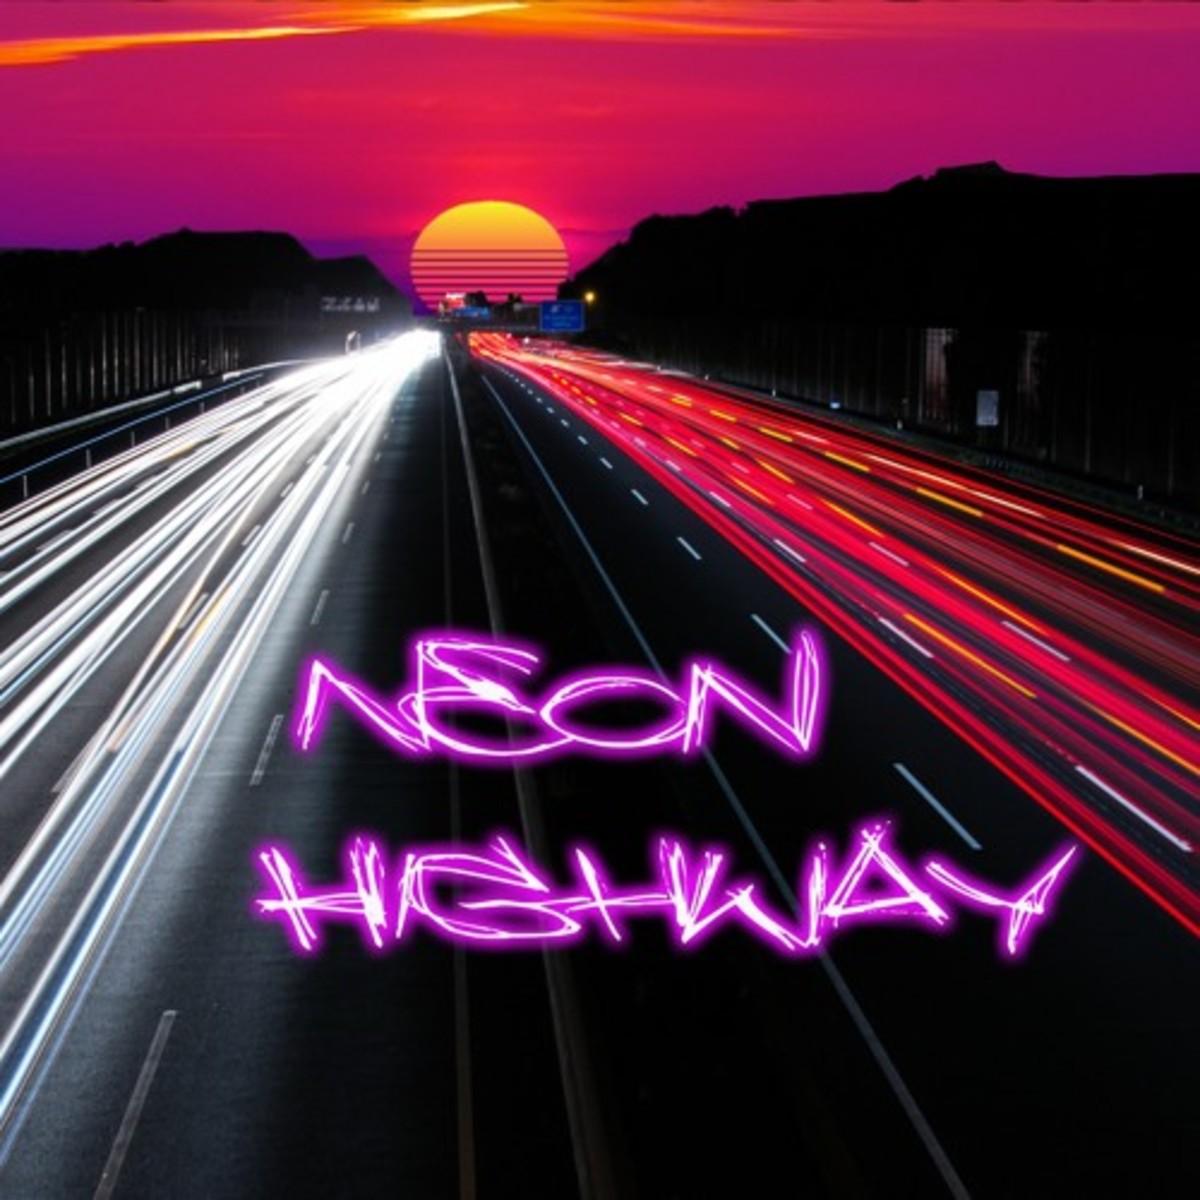 synth-single-review-neon-highway-by-helsinki-project